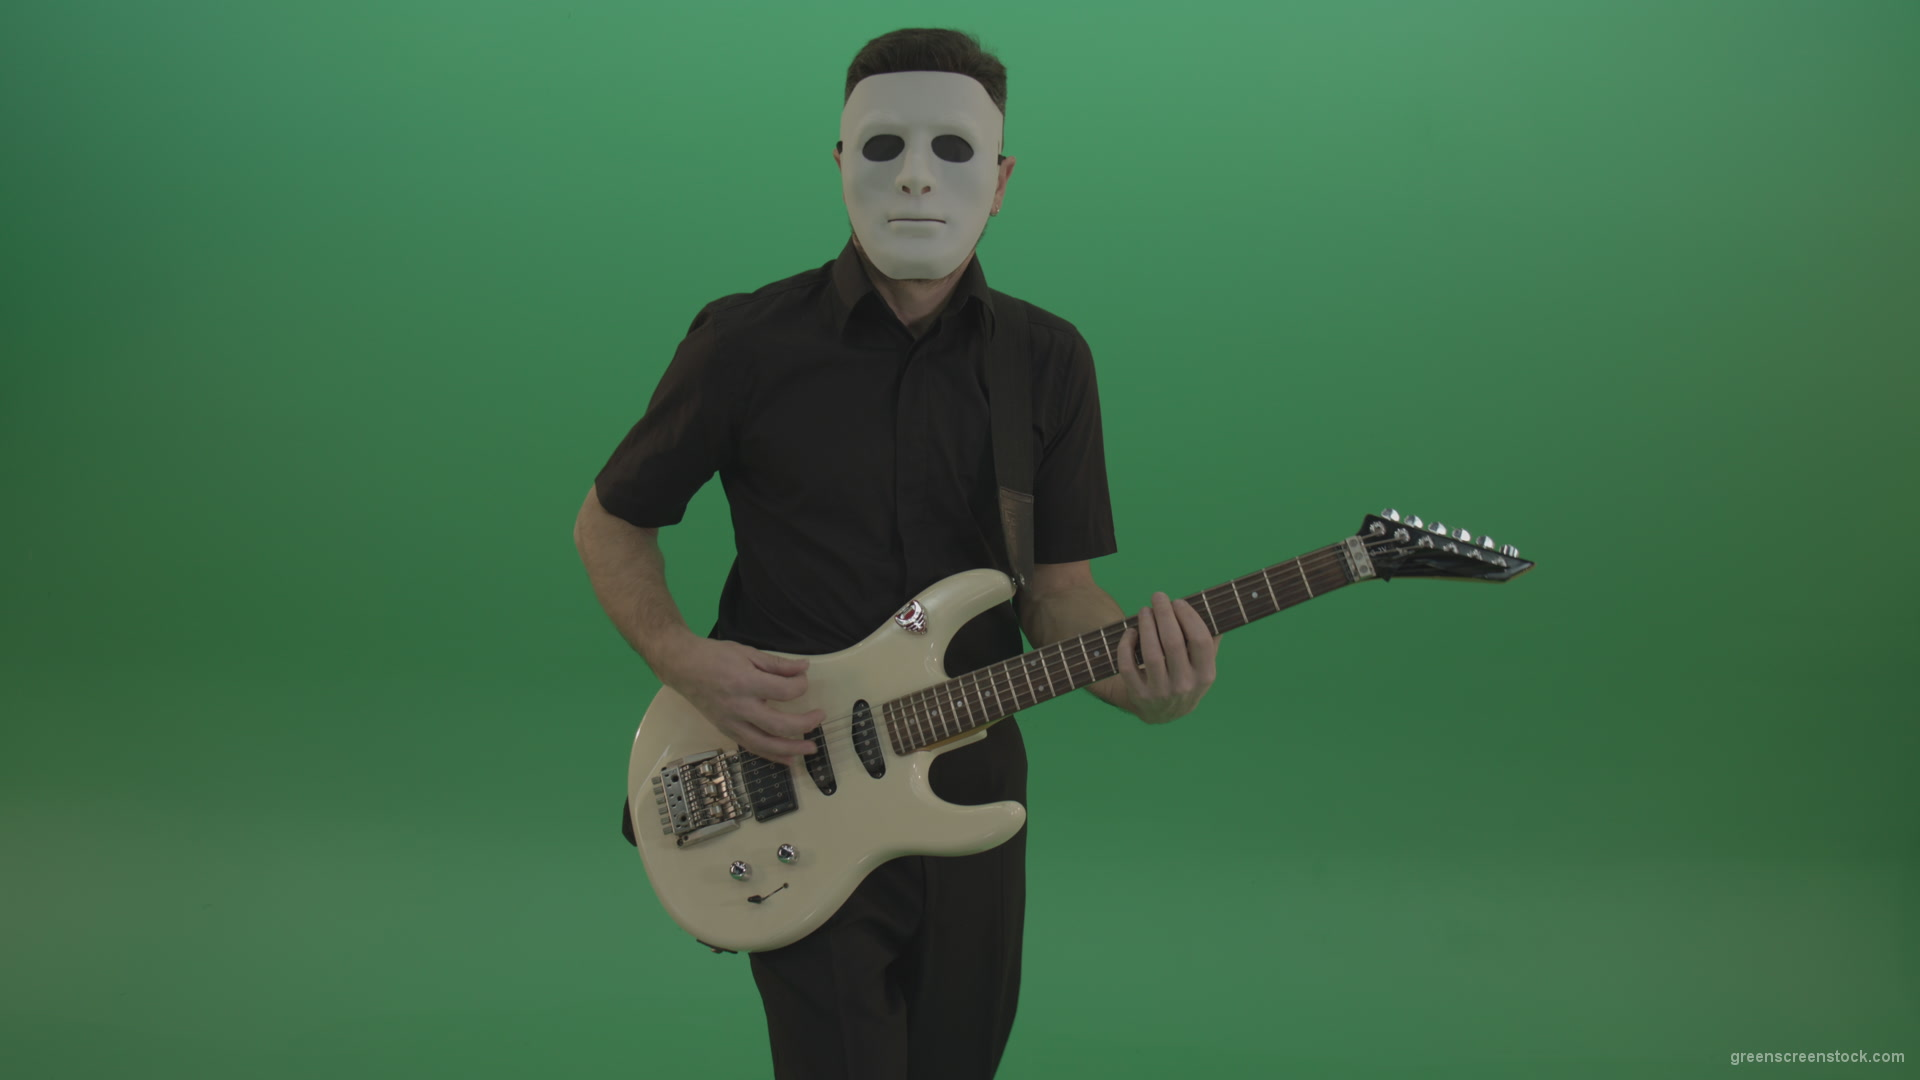 Rock-man-in-white-mask-and-black-wear-playing-guitar-isolated-on-green-screen-in-front-view_008 Green Screen Stock